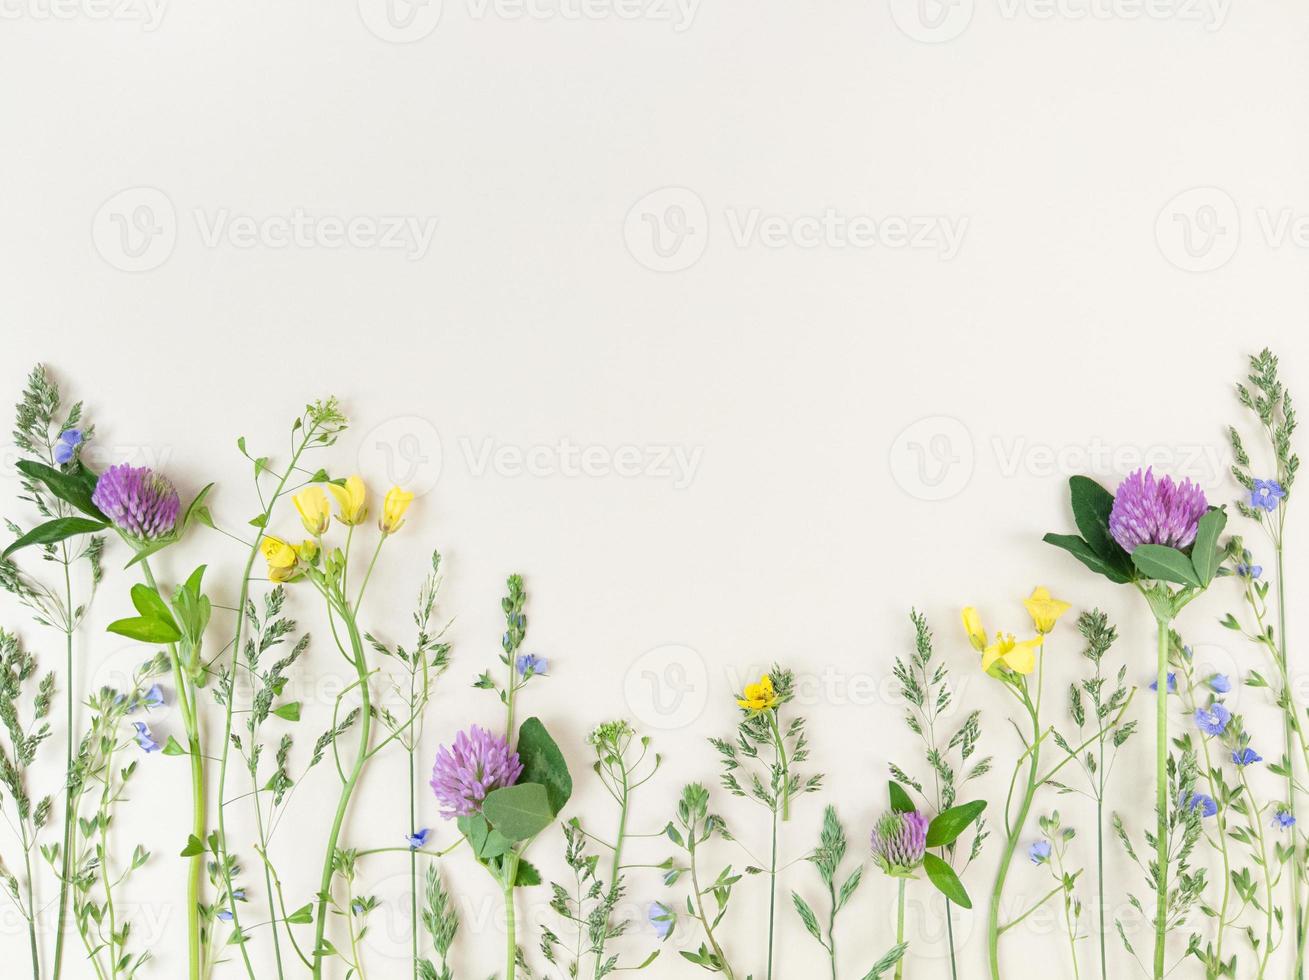 Mix of wildflowers on beige background with copy space. photo